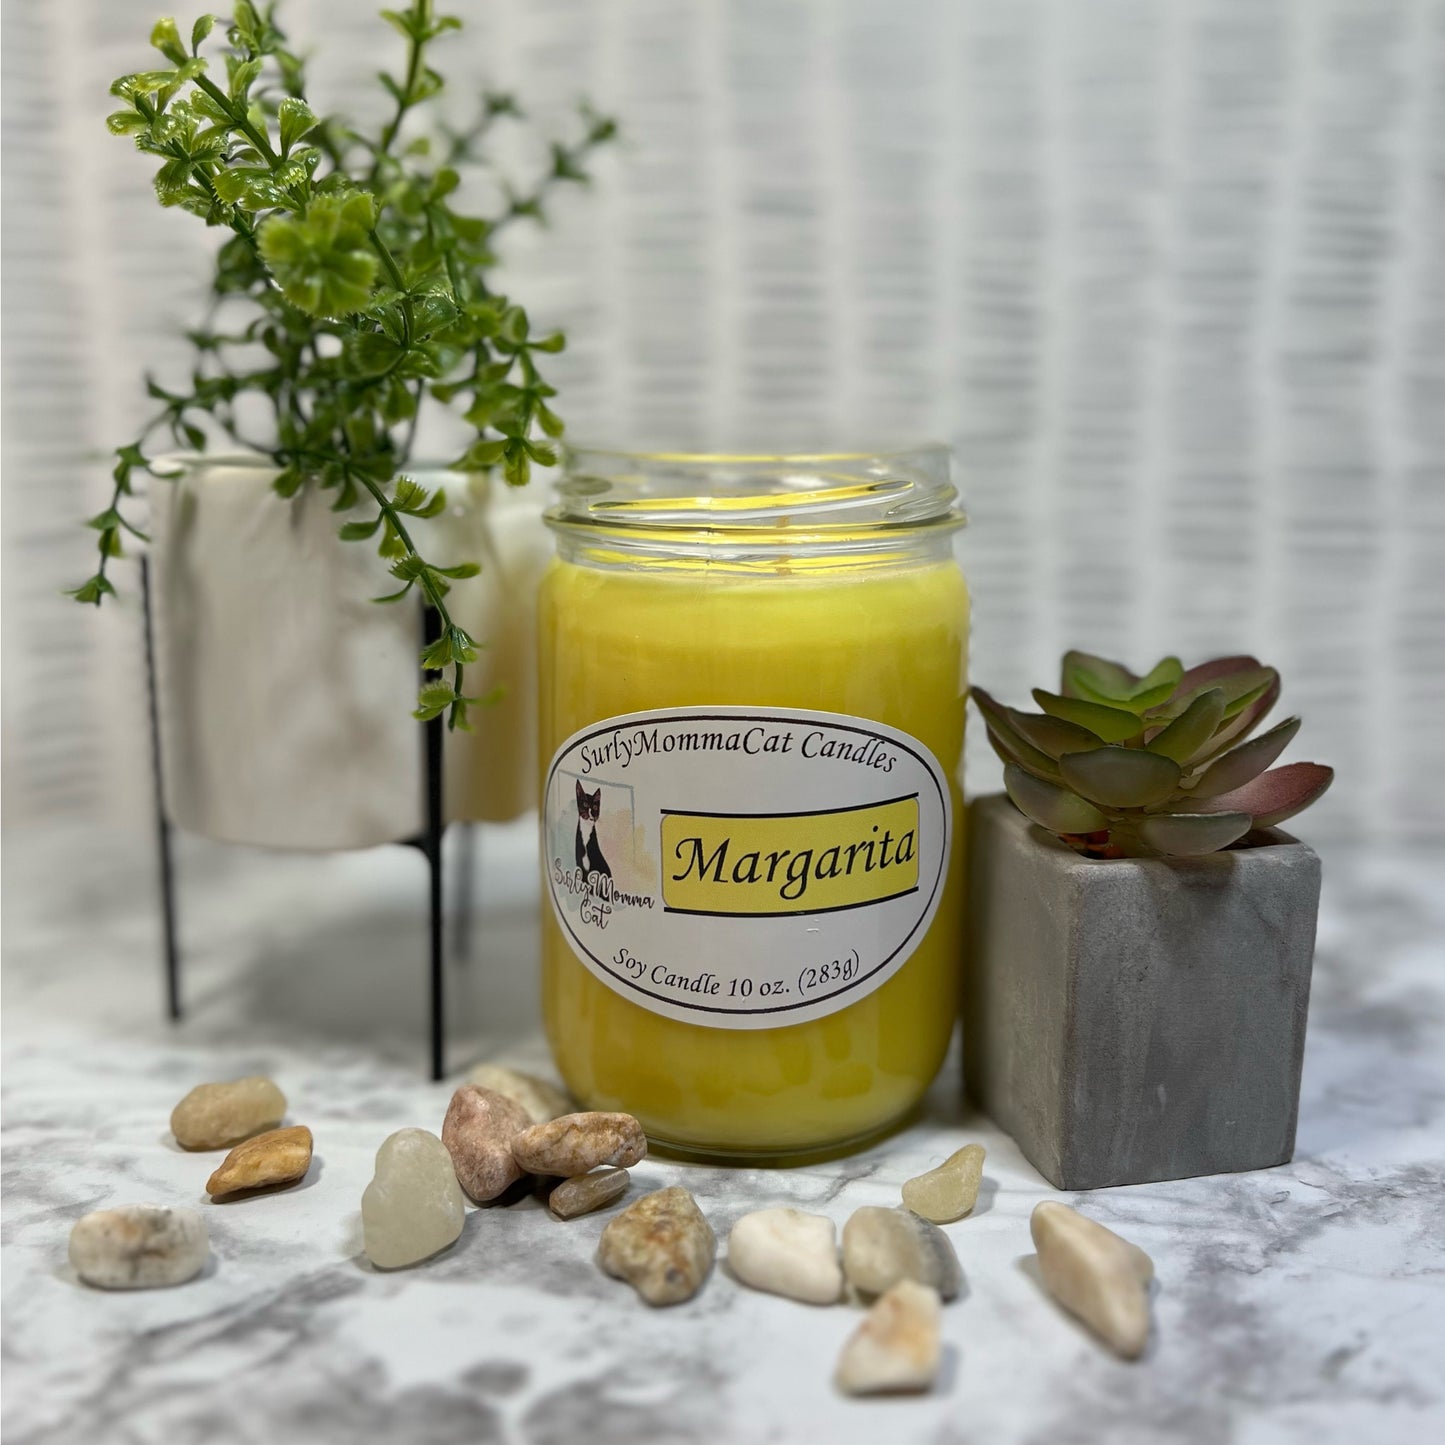 Yellow soy Margarita candle with decorative rocks and small plants for decor.